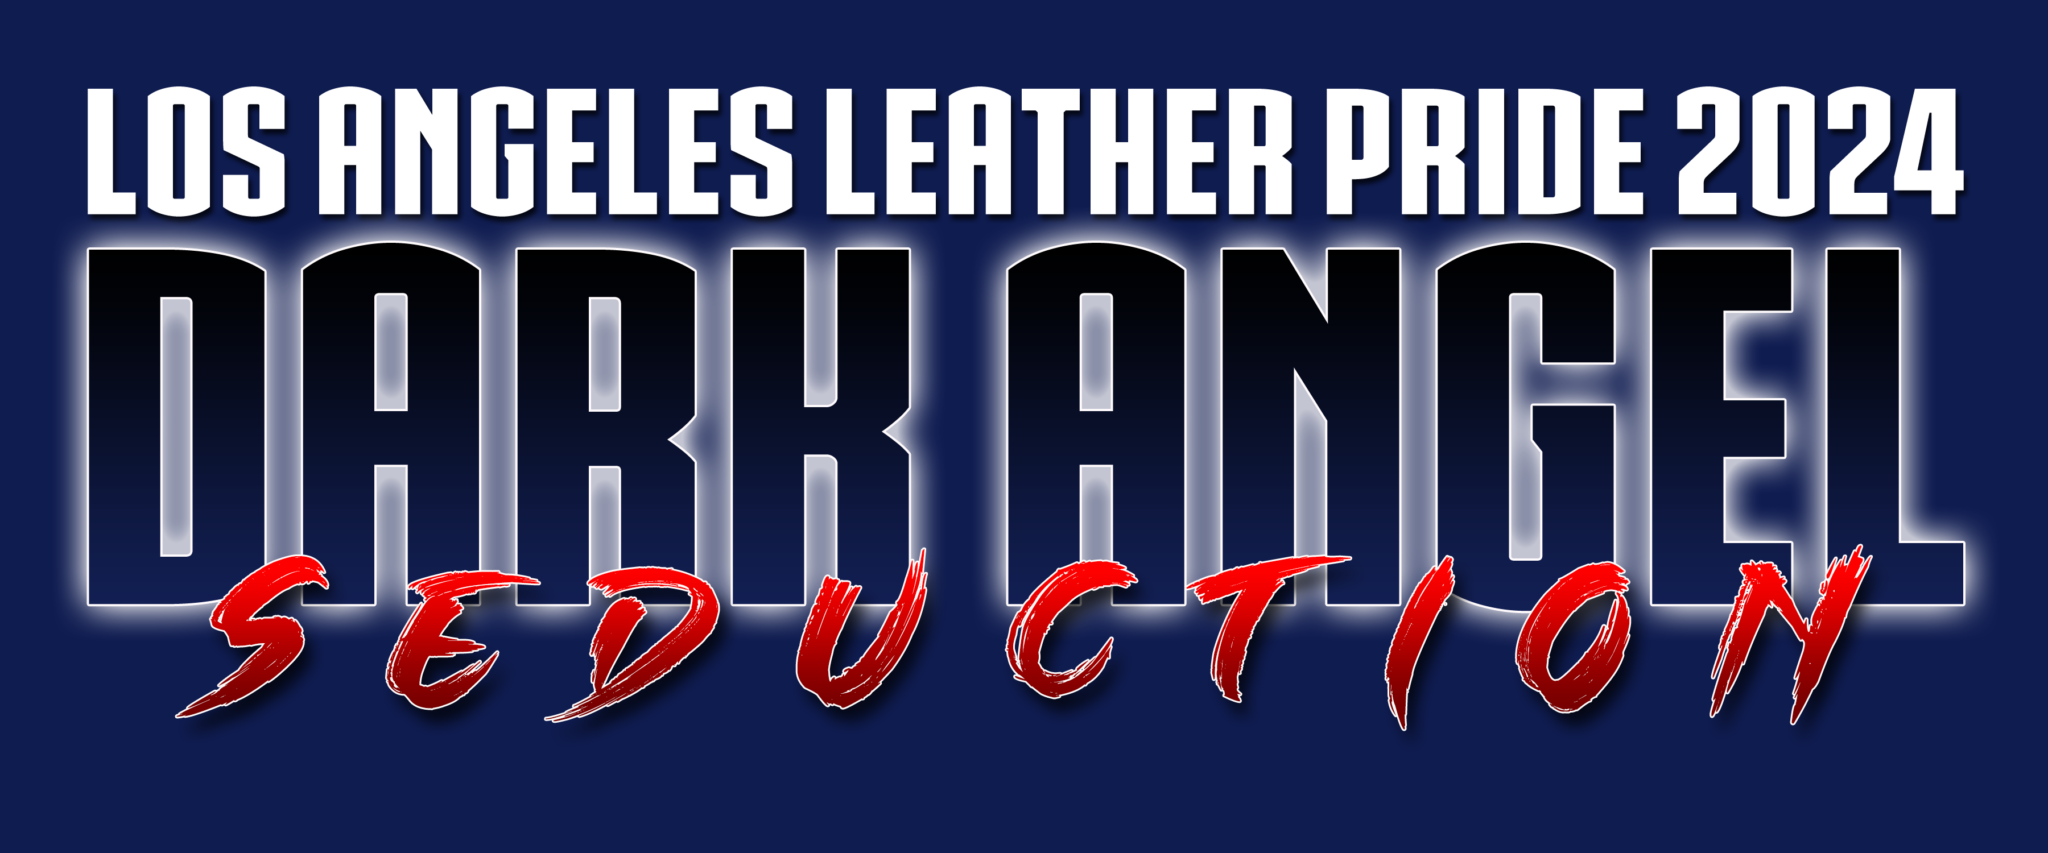 LALC HAS THREE CHARITY PARTNERS FOR LA LEATHER PRIDE 2024 Los Angeles